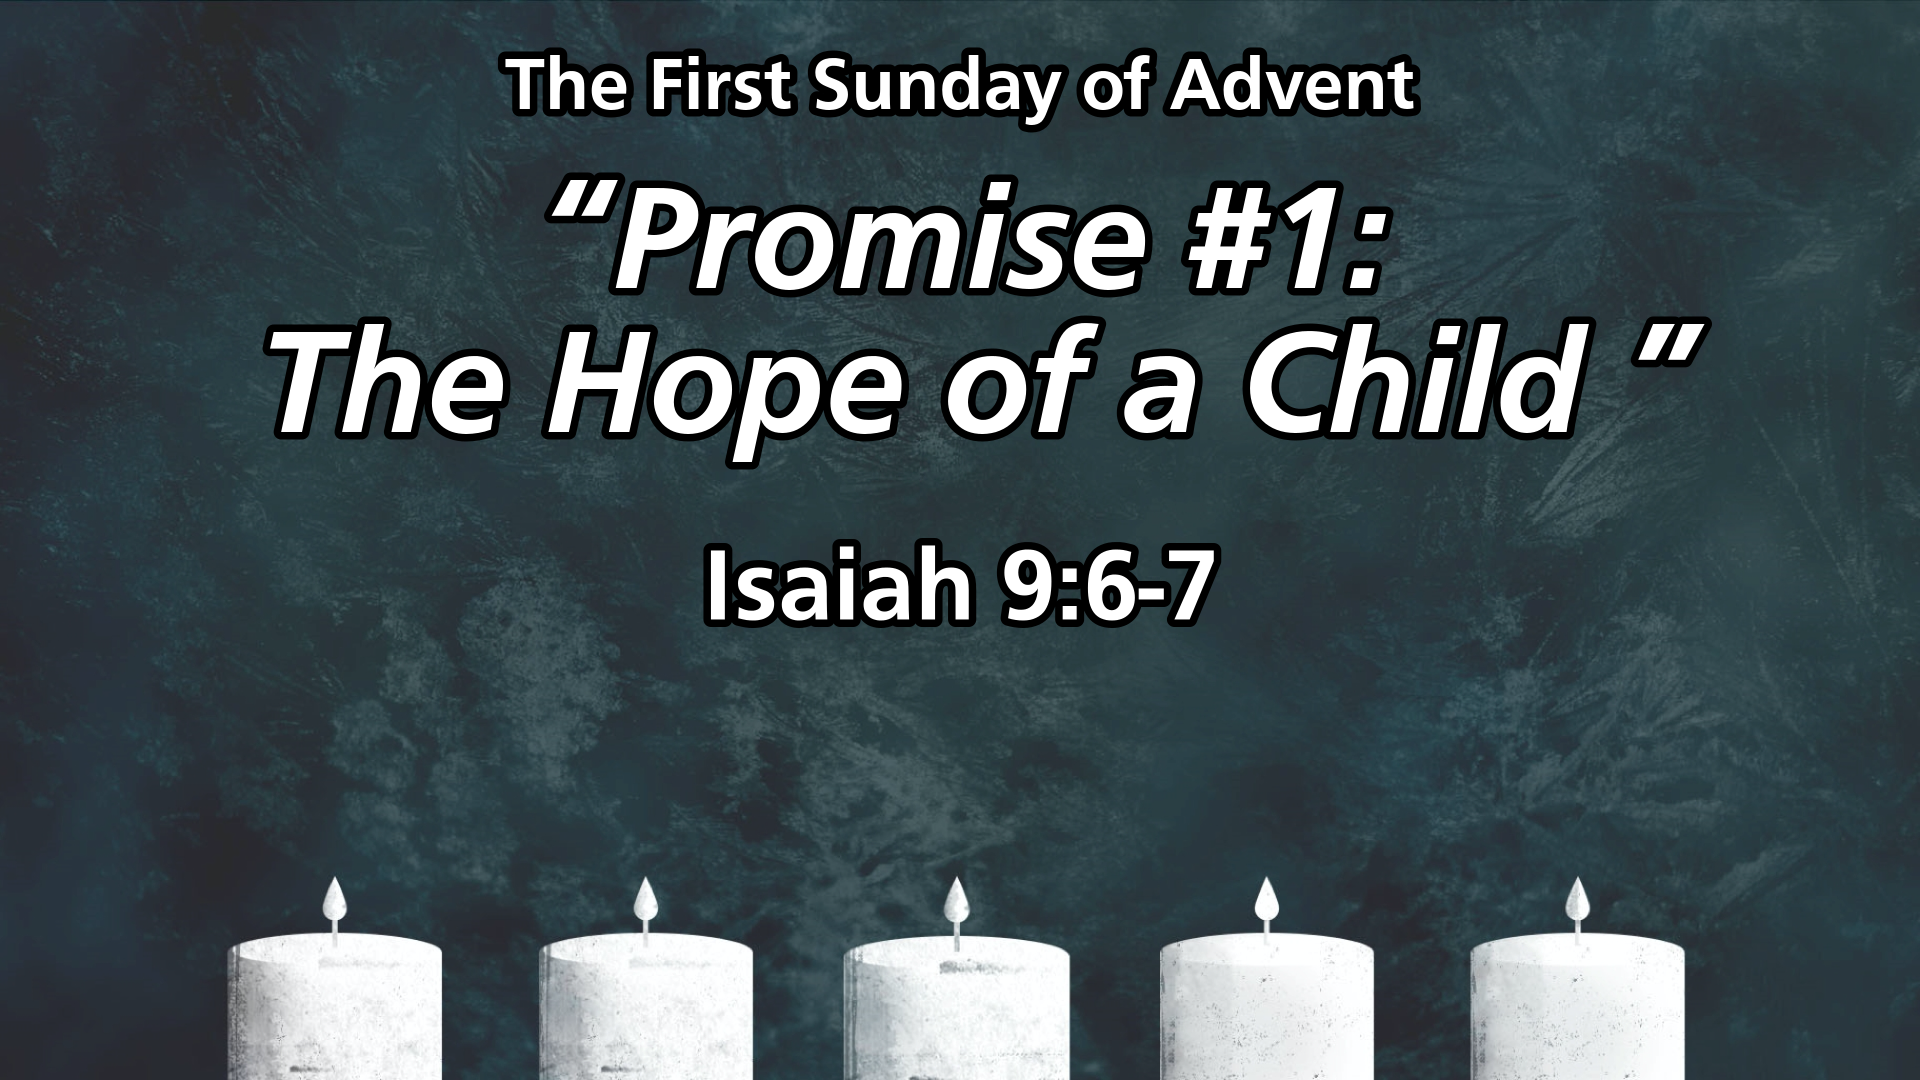 “Promise #1: The Hope of a Child”